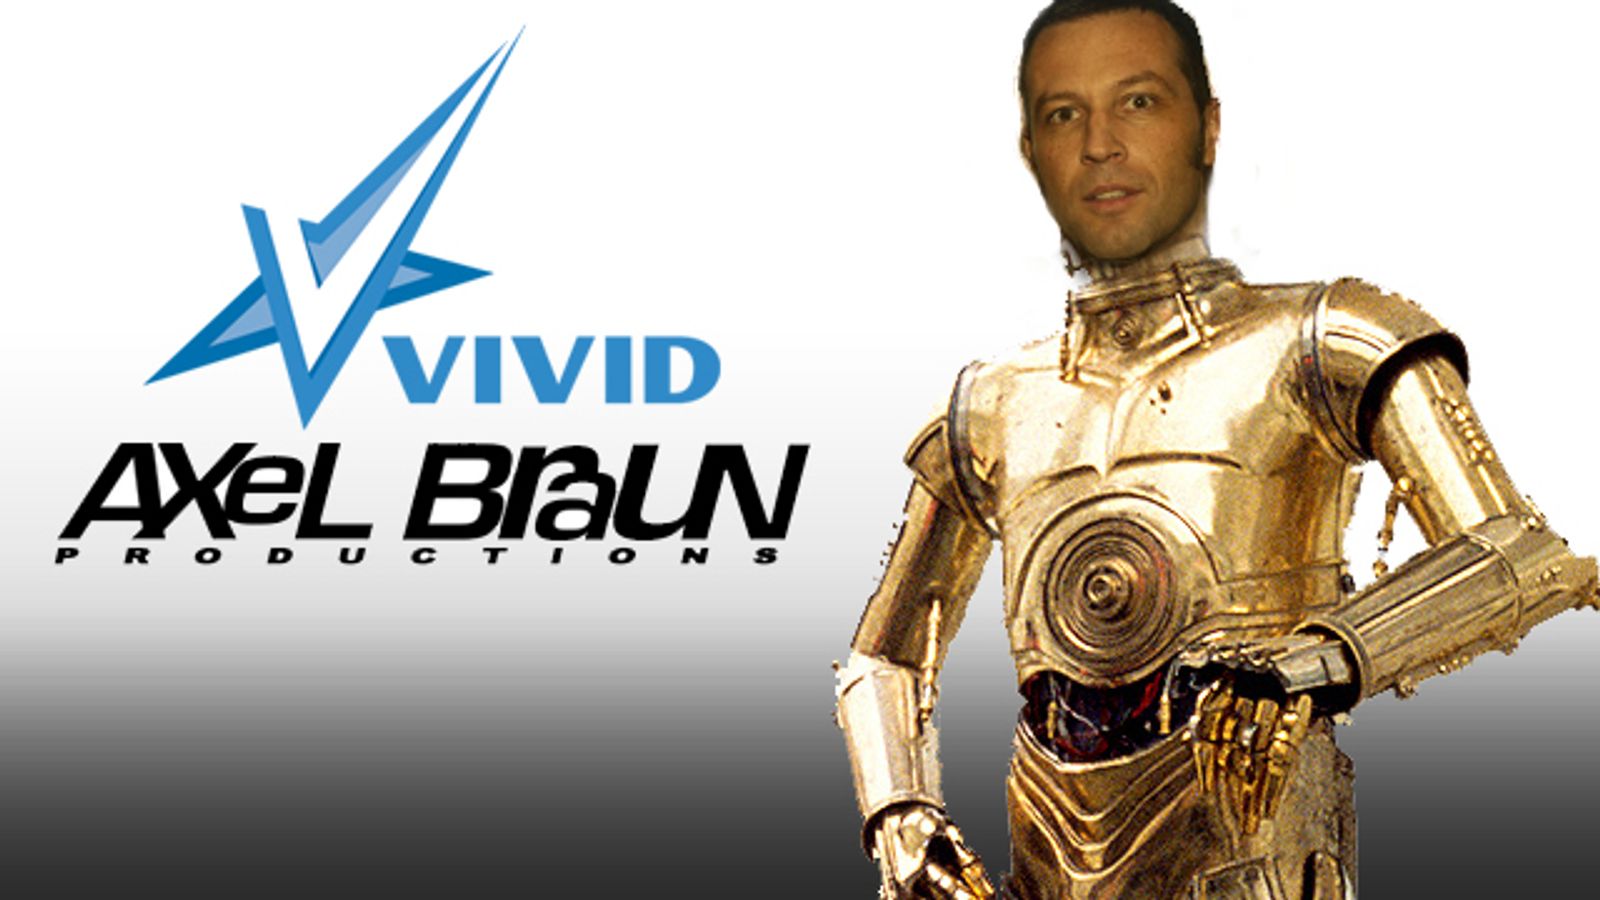 Axel Braun to Summon the Force for Vivid